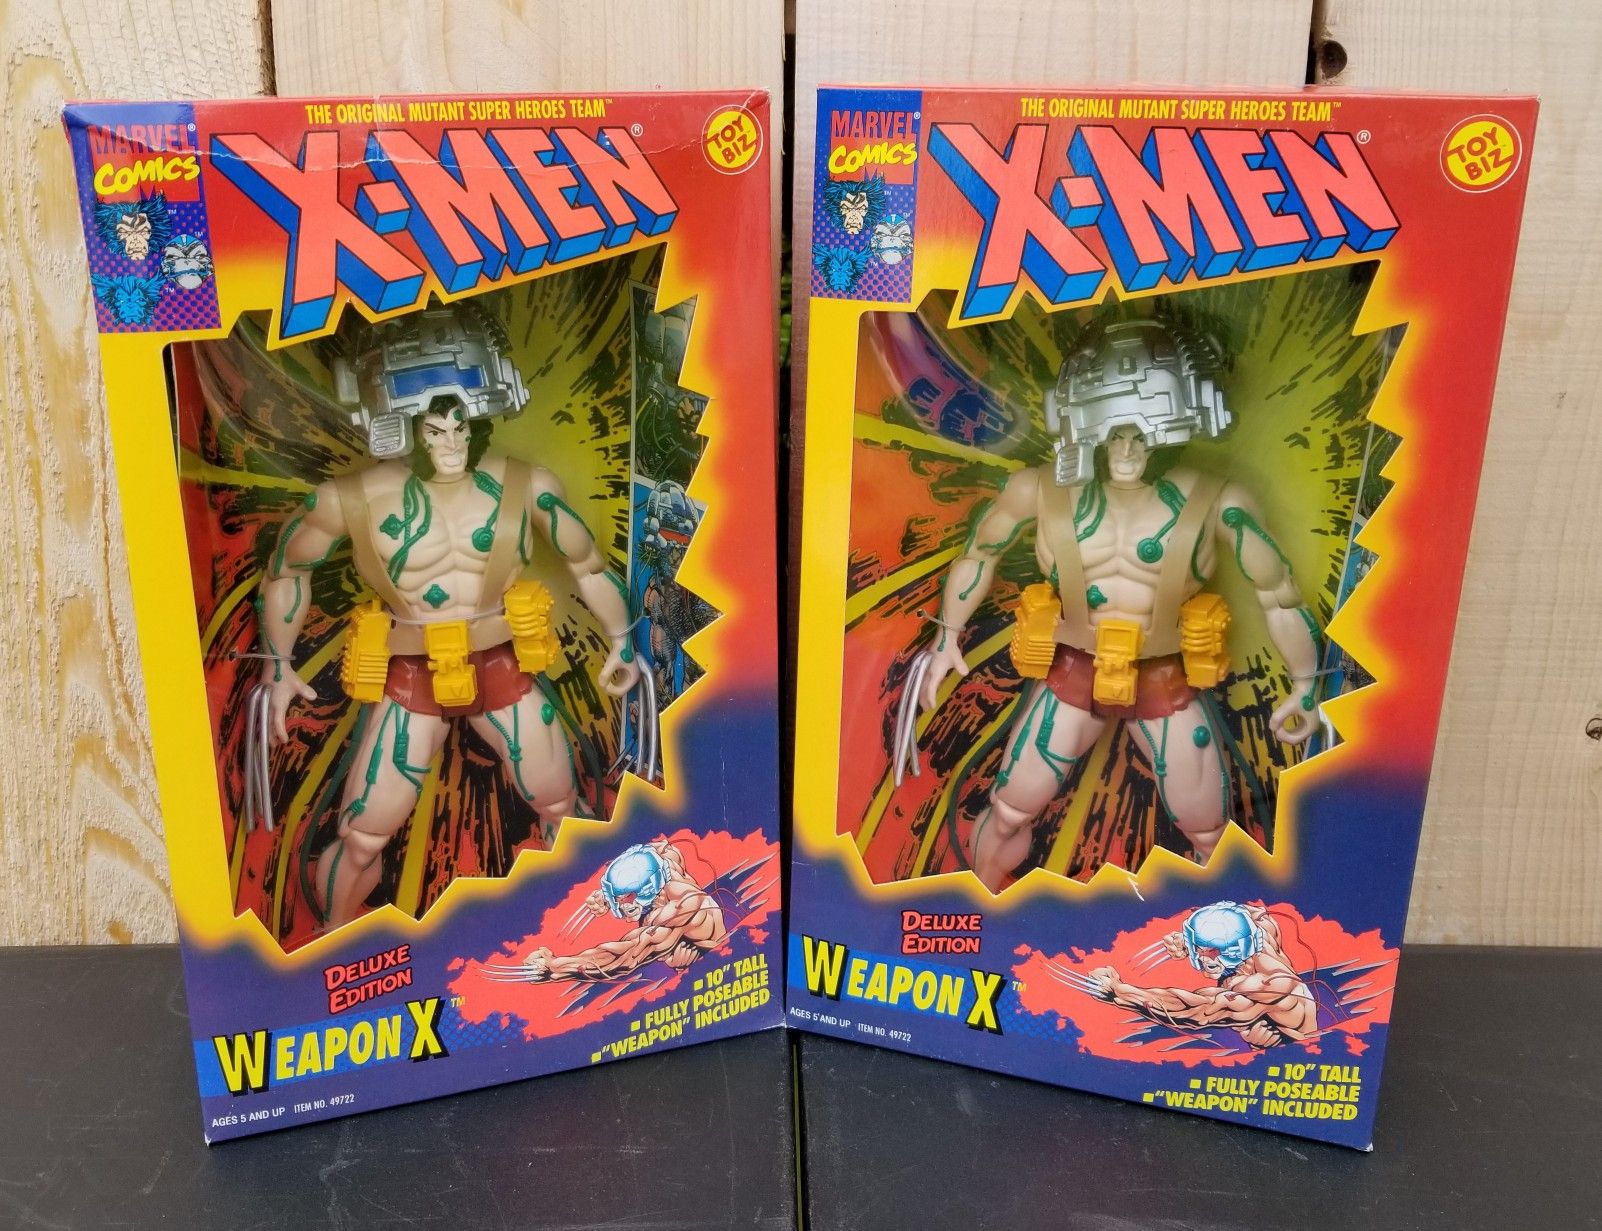 ($20 EACH) NEW 1O" DELUXE EDITION MARVEL X-MEN WEAPON X ACTION FIGURE